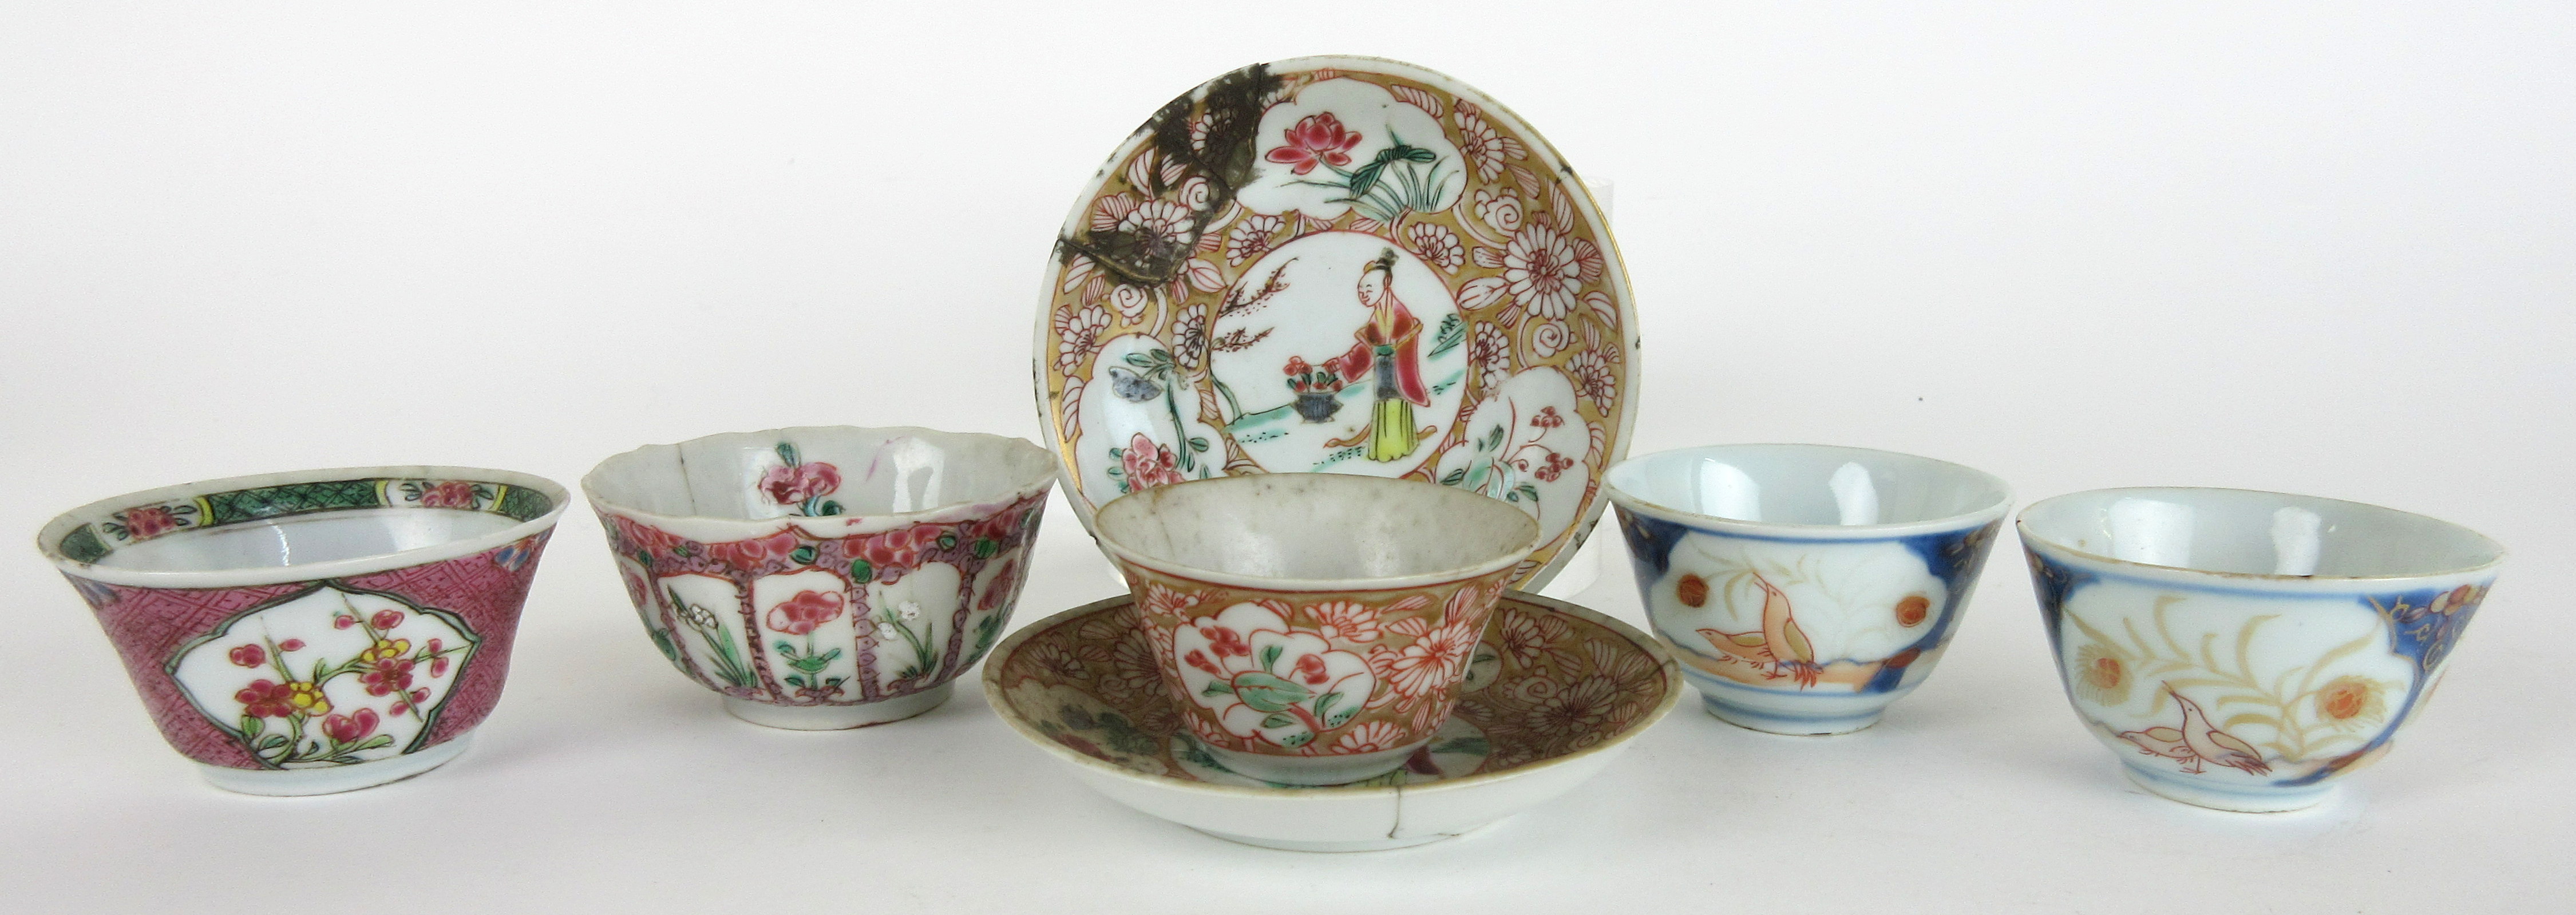 A pair of Chinese Imari tea bowls painted with birds and foliage, 6cm diameter, two gold ground